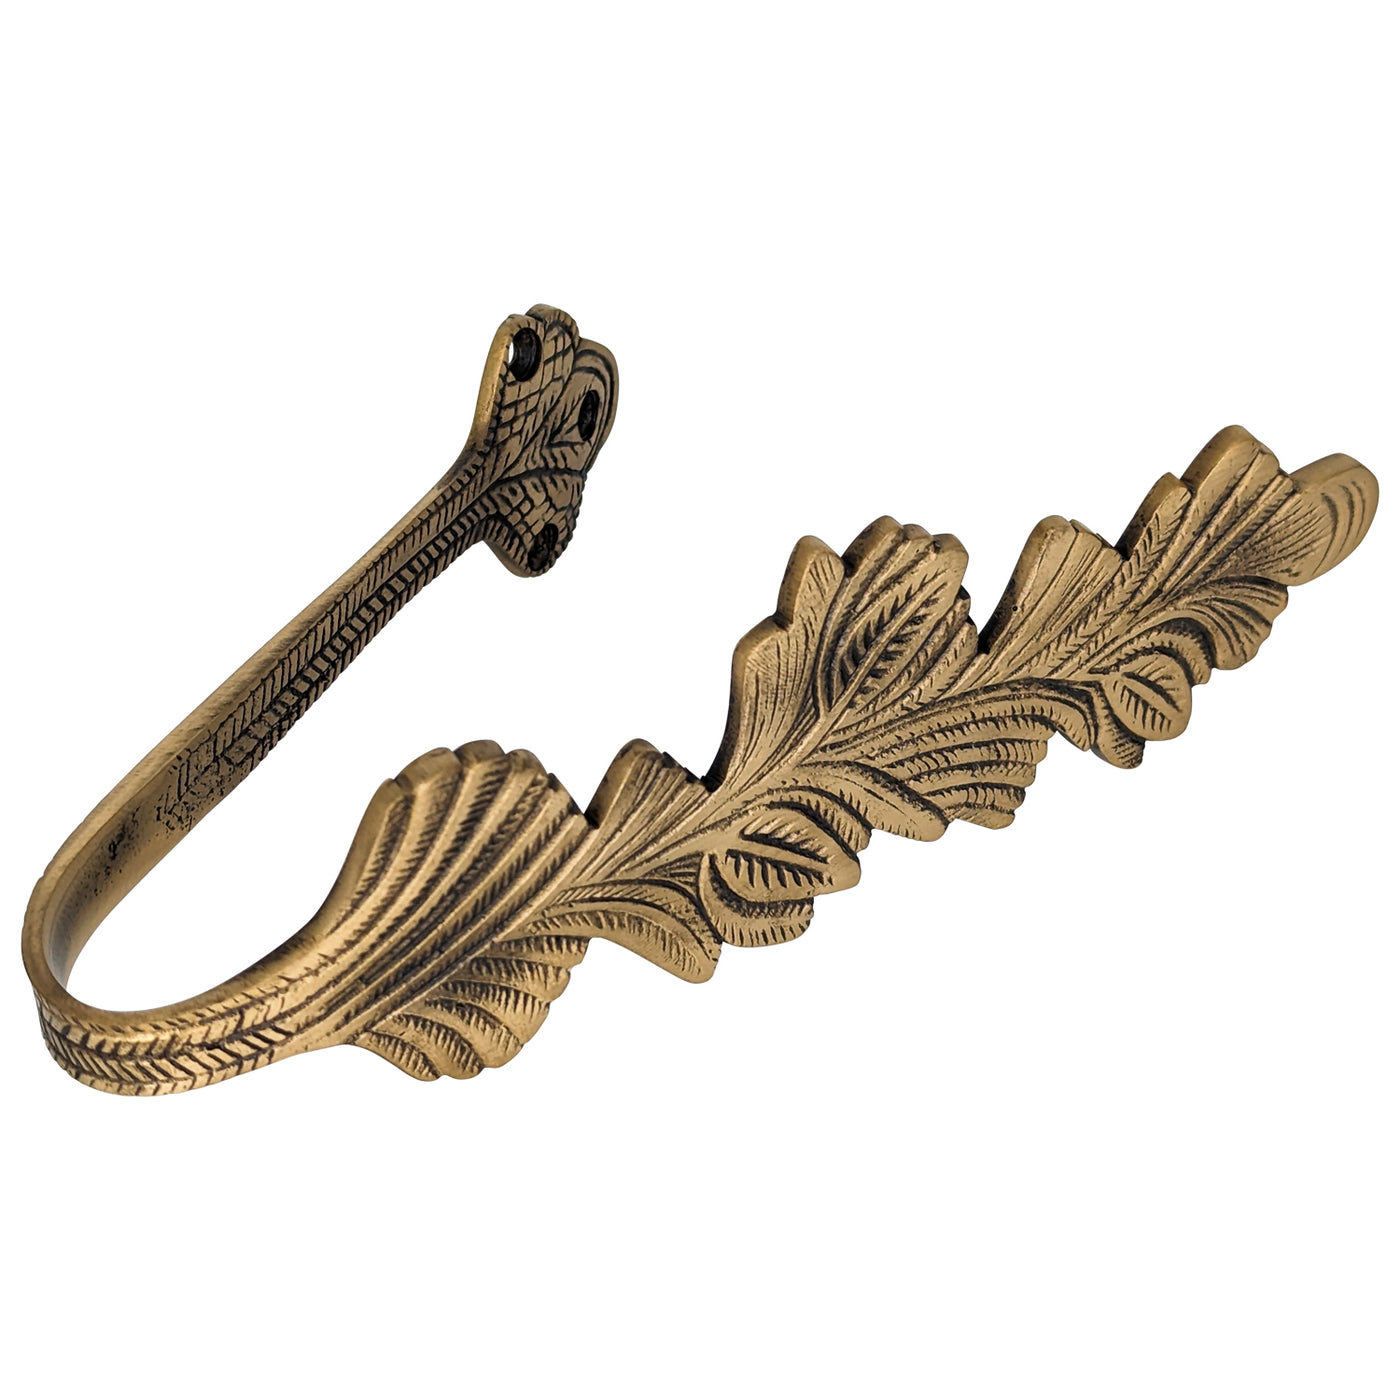 Solid Brass Curtain Tie Back - Oriental Leaves Style (Antique Brass Finish)